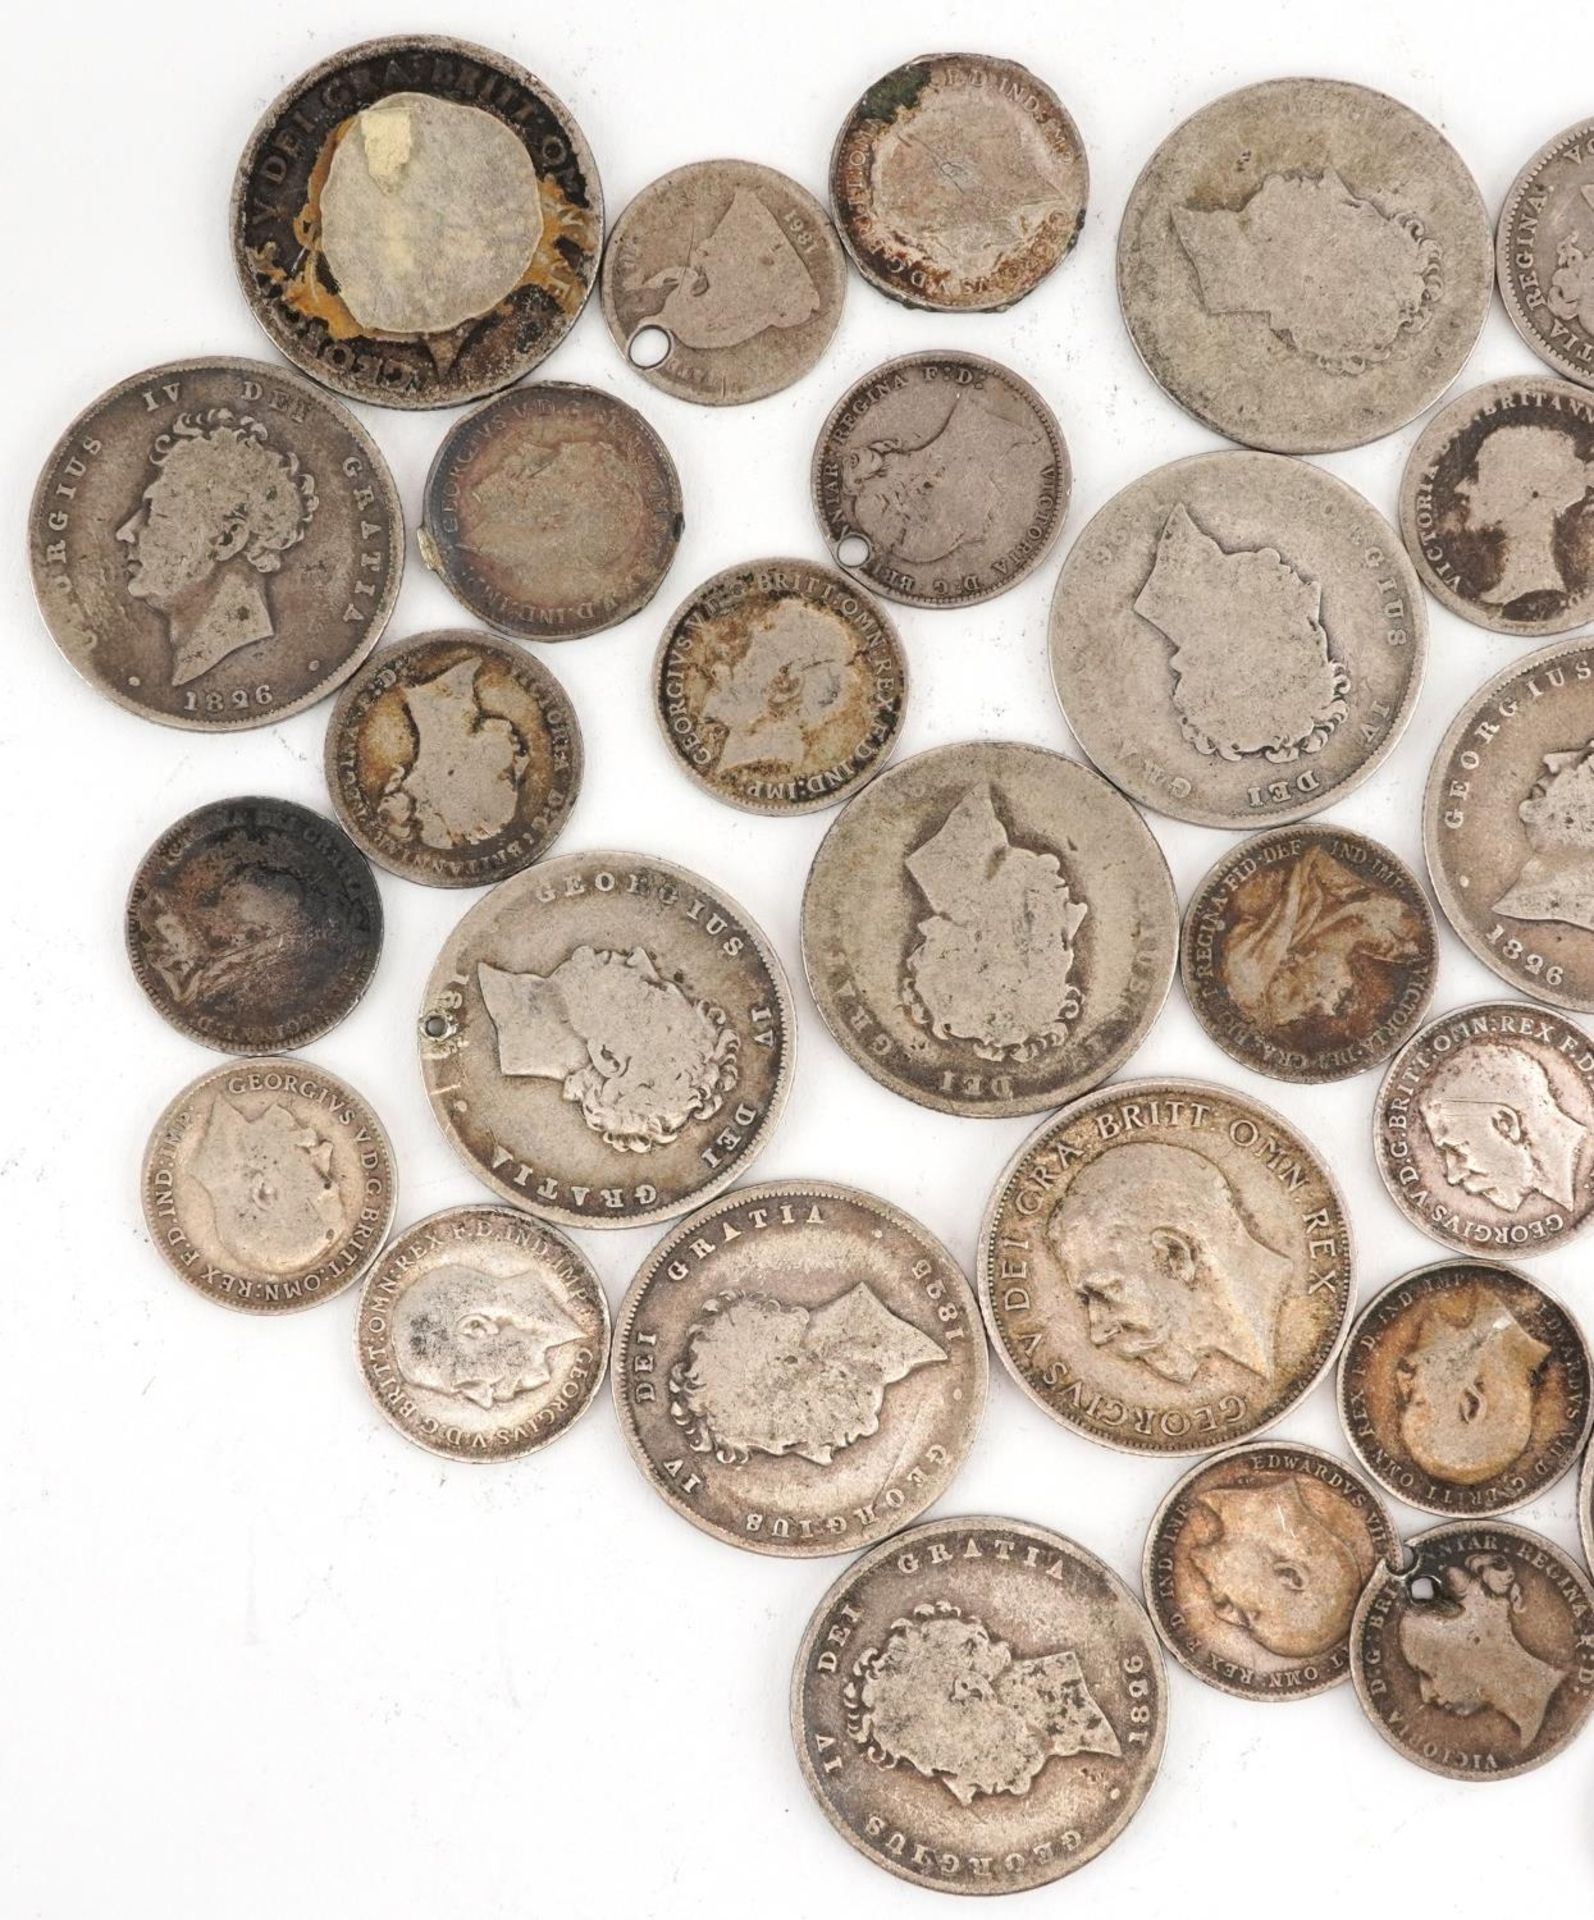 British pre decimal, pre 1947 coinage including half crown and shillings, 120g - Image 5 of 6